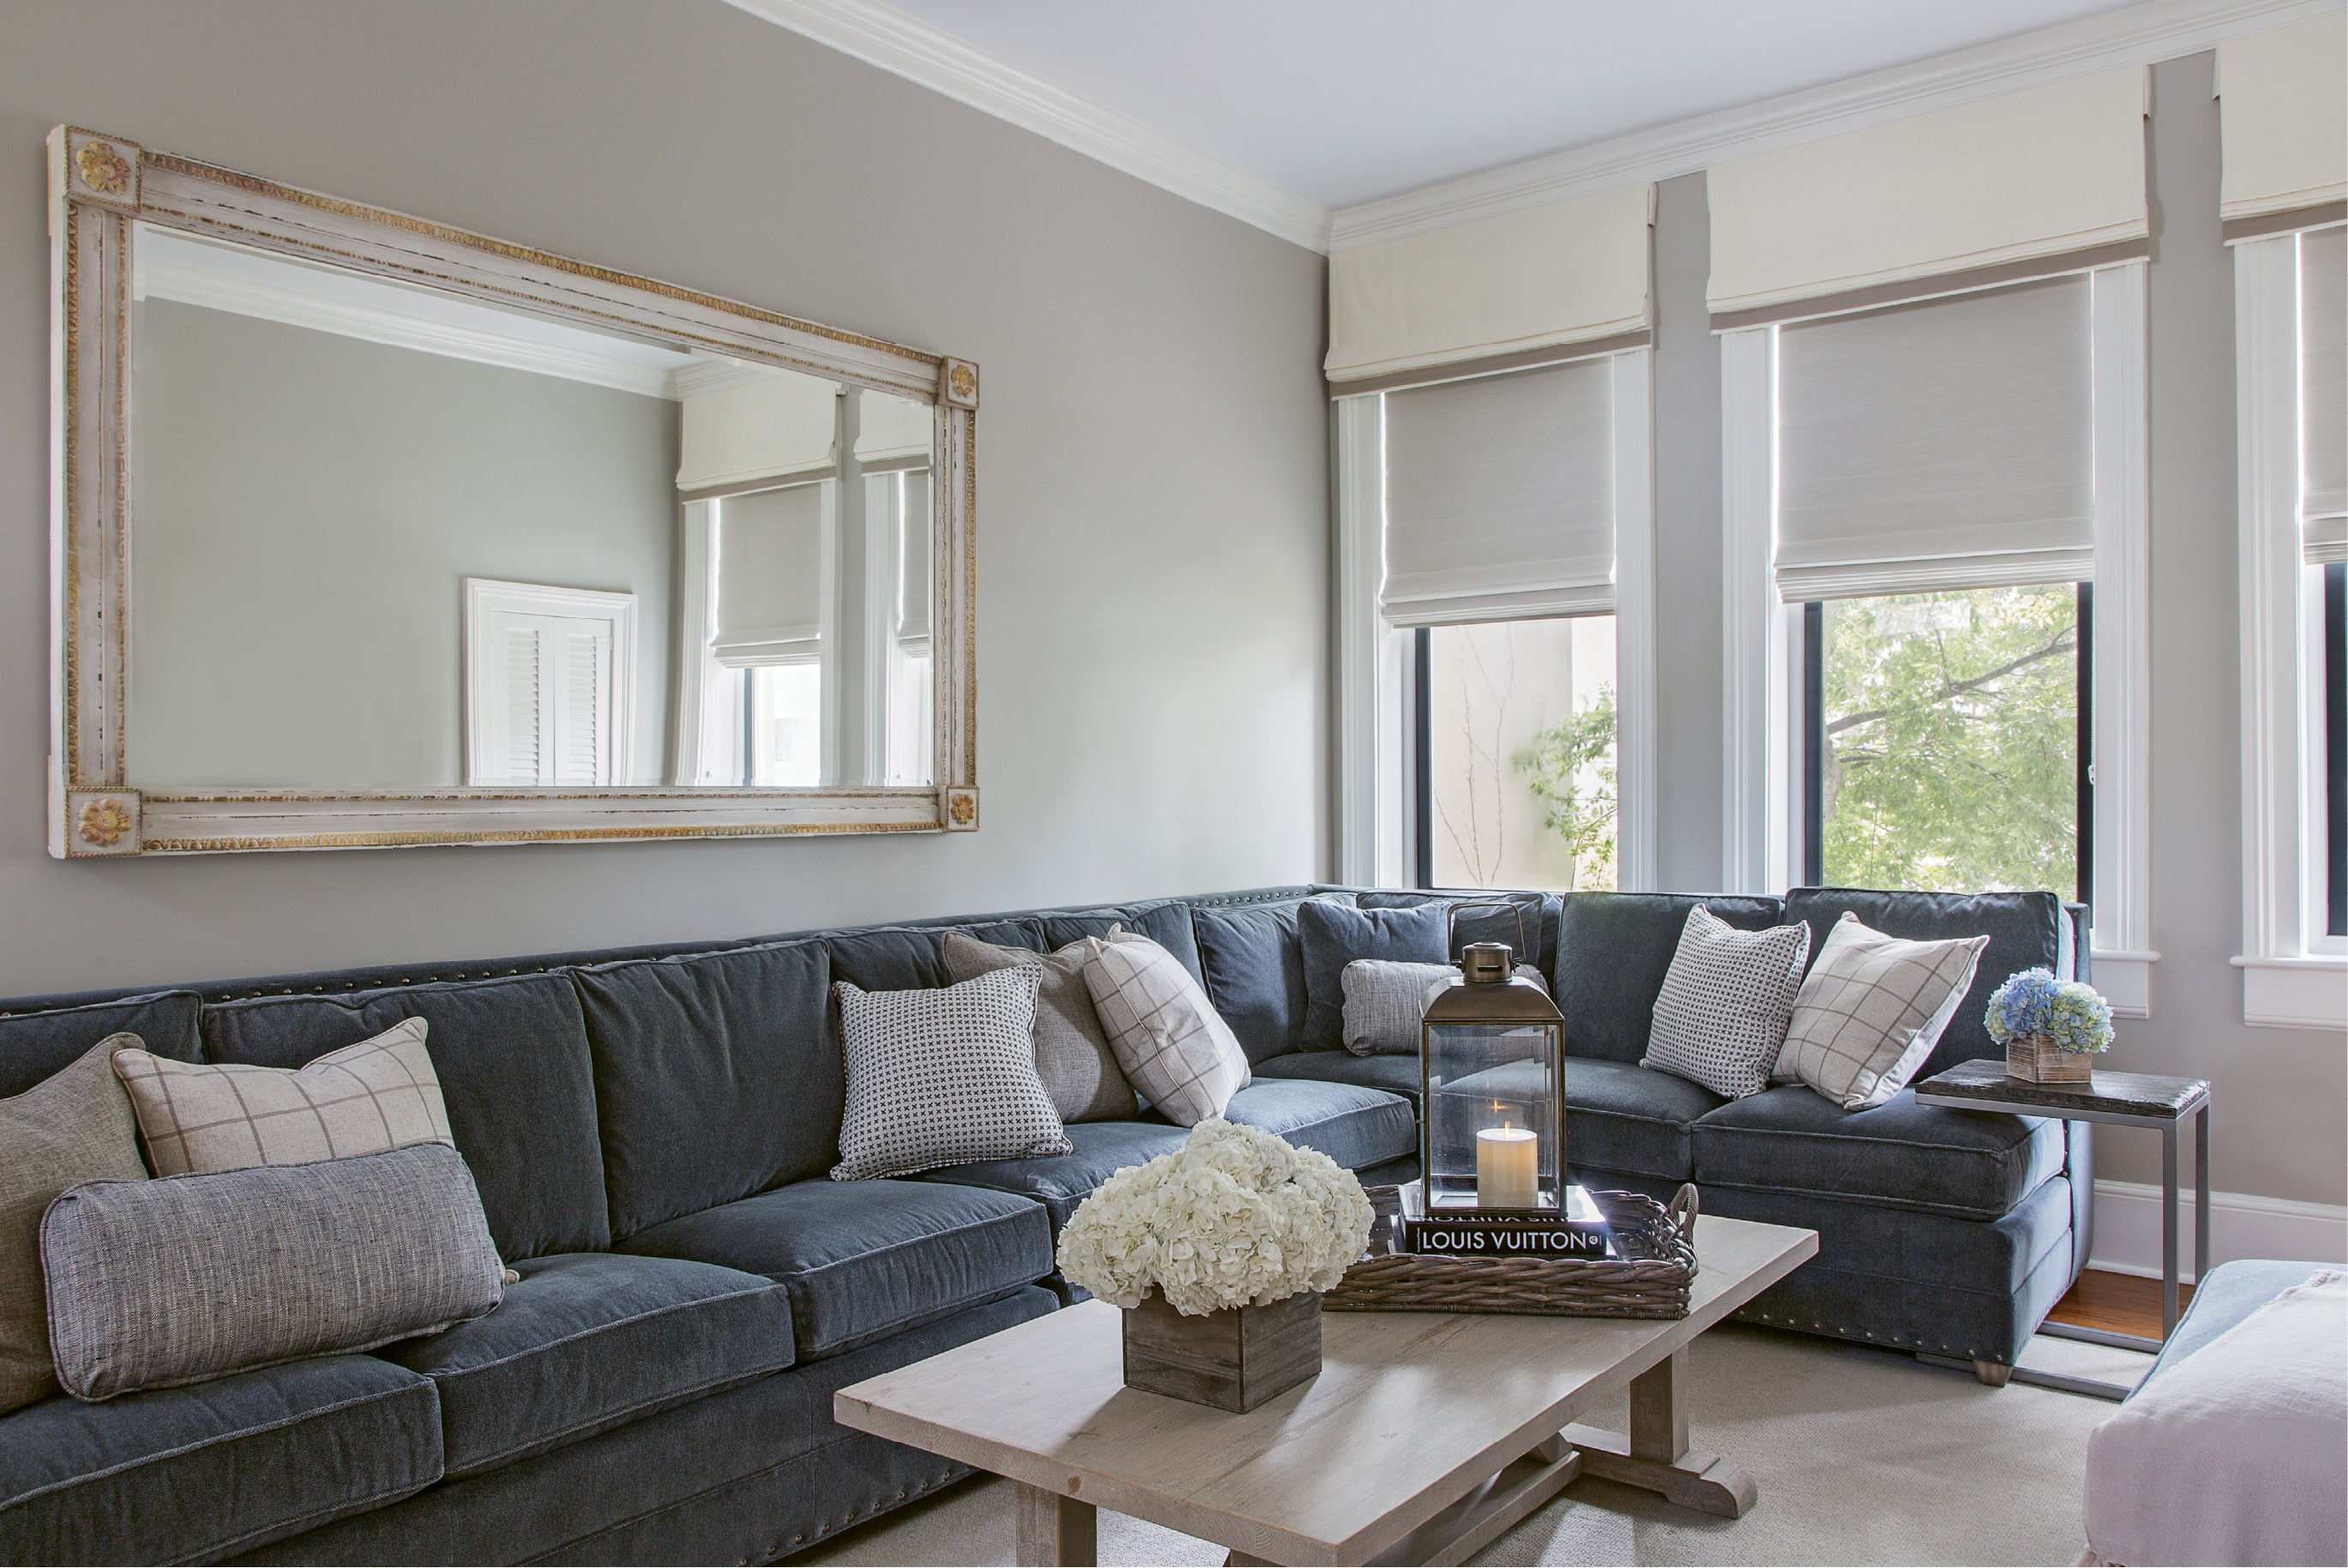 Rick’s only request for the décor? “He said he wanted a really comfortable couch,” says Kristy. The custom sectional from Vanguard offers plenty of seating in the family room. Instead of elaborate window treatments that could easily overtake the decor, Peake chose light-hued, space-saving woven shades and had the window mullions painted in “Kendall Charcoal” by Benjamin Moore for a modern look that highlights the woodwork while creating depth.